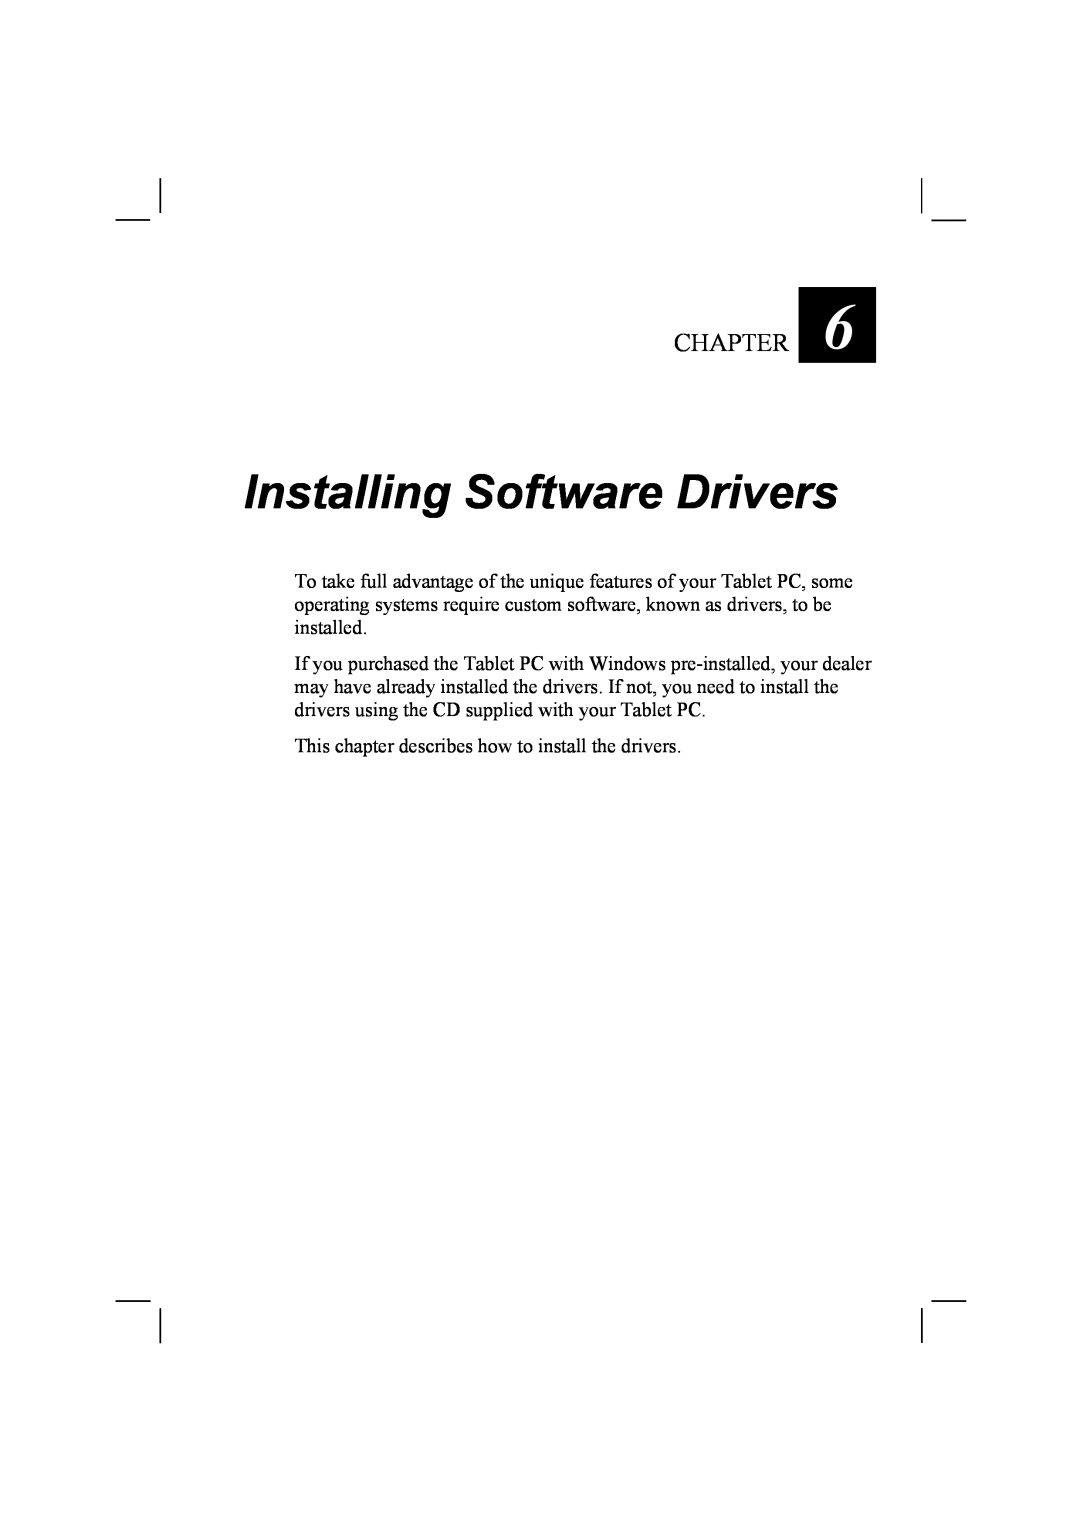 TAG 10 manual Installing Software Drivers, Chapter 